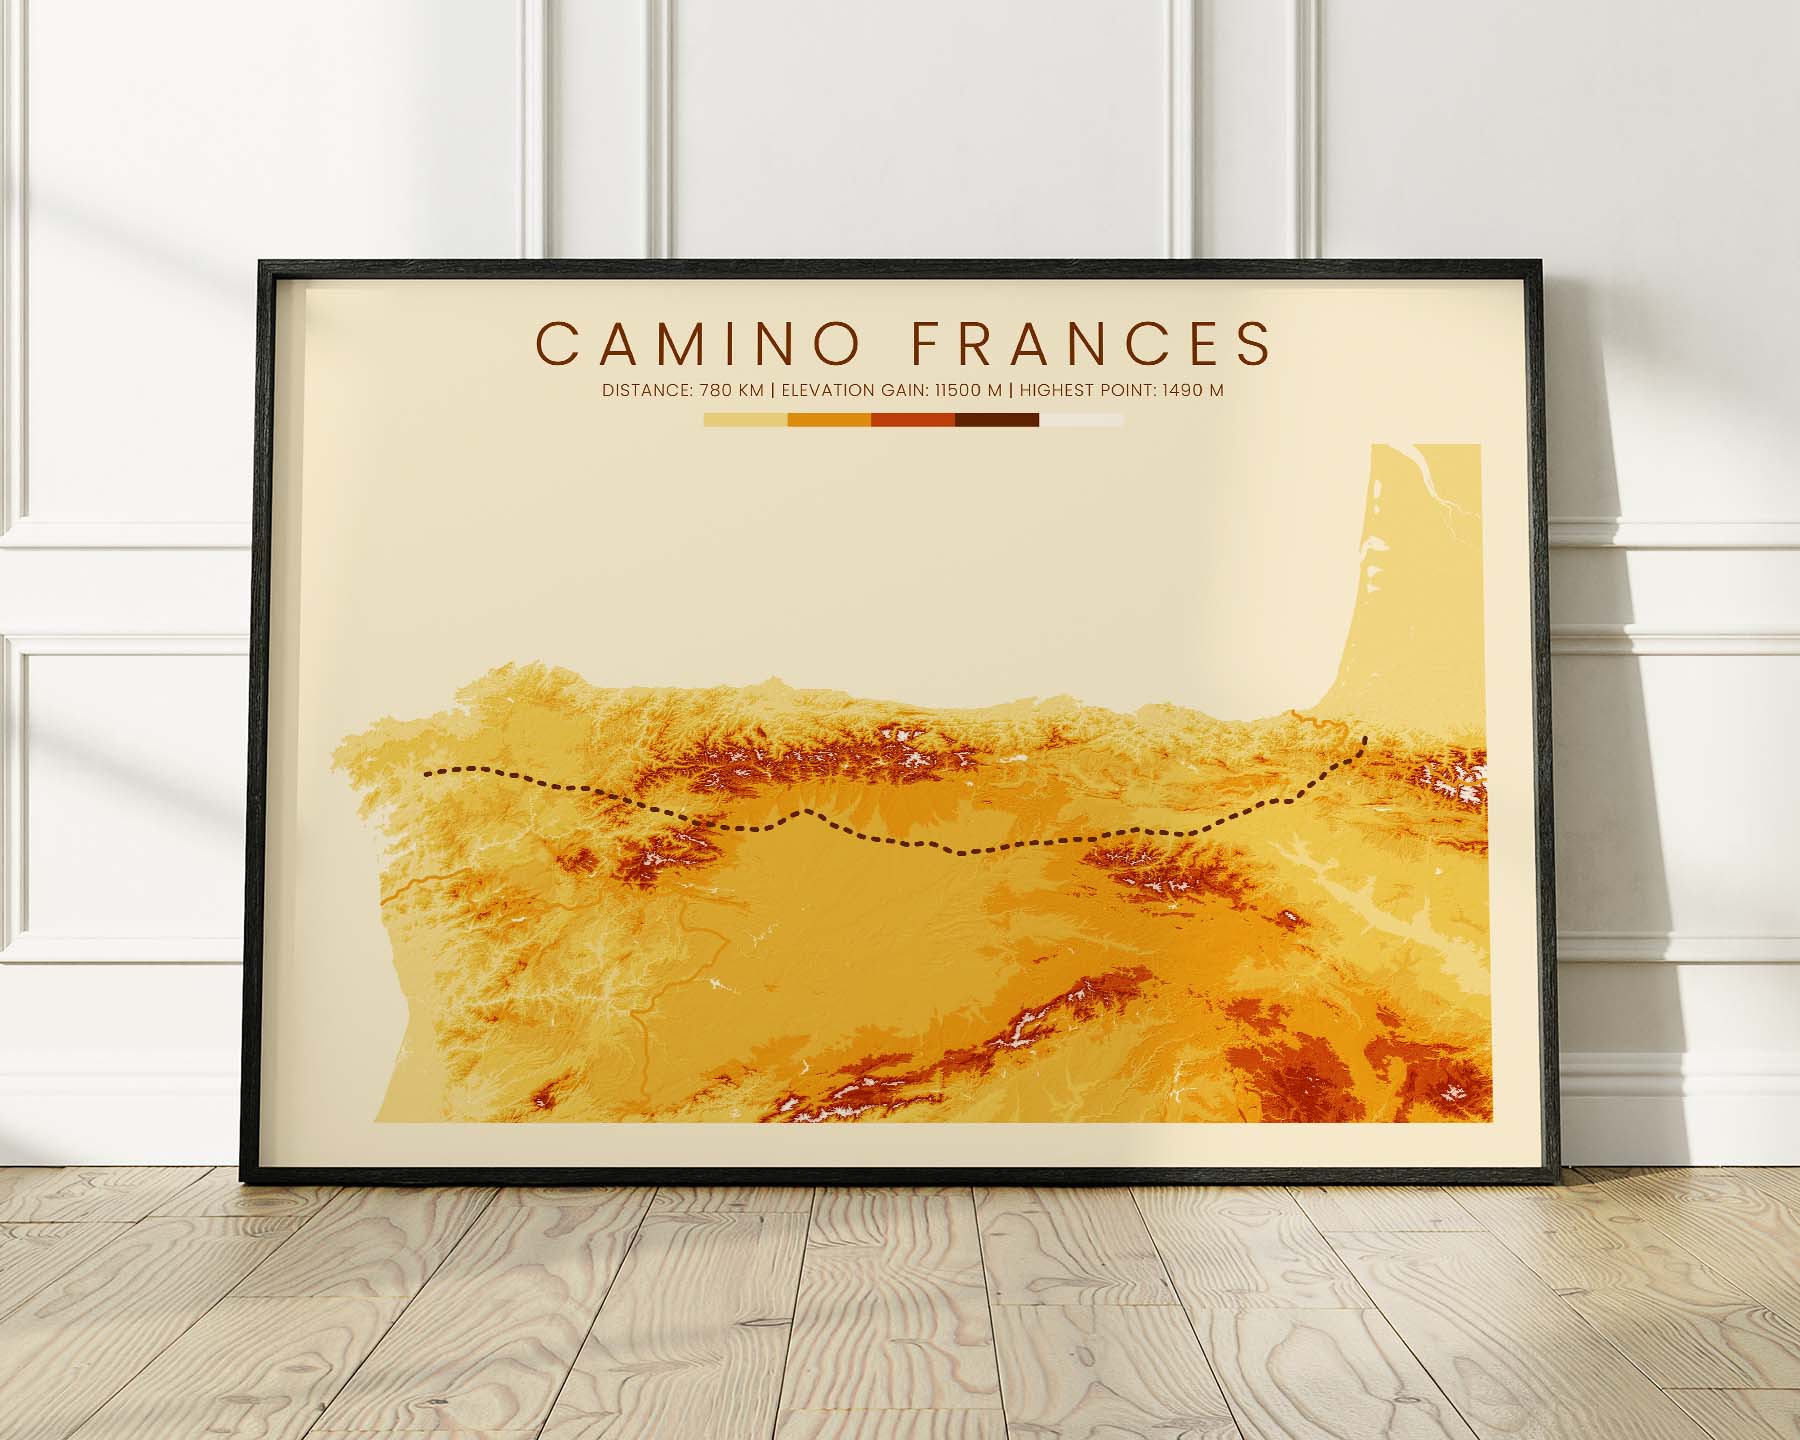 The French Way (France) Hike Wall Art with Vintage Orange Background in Modern Room Decor